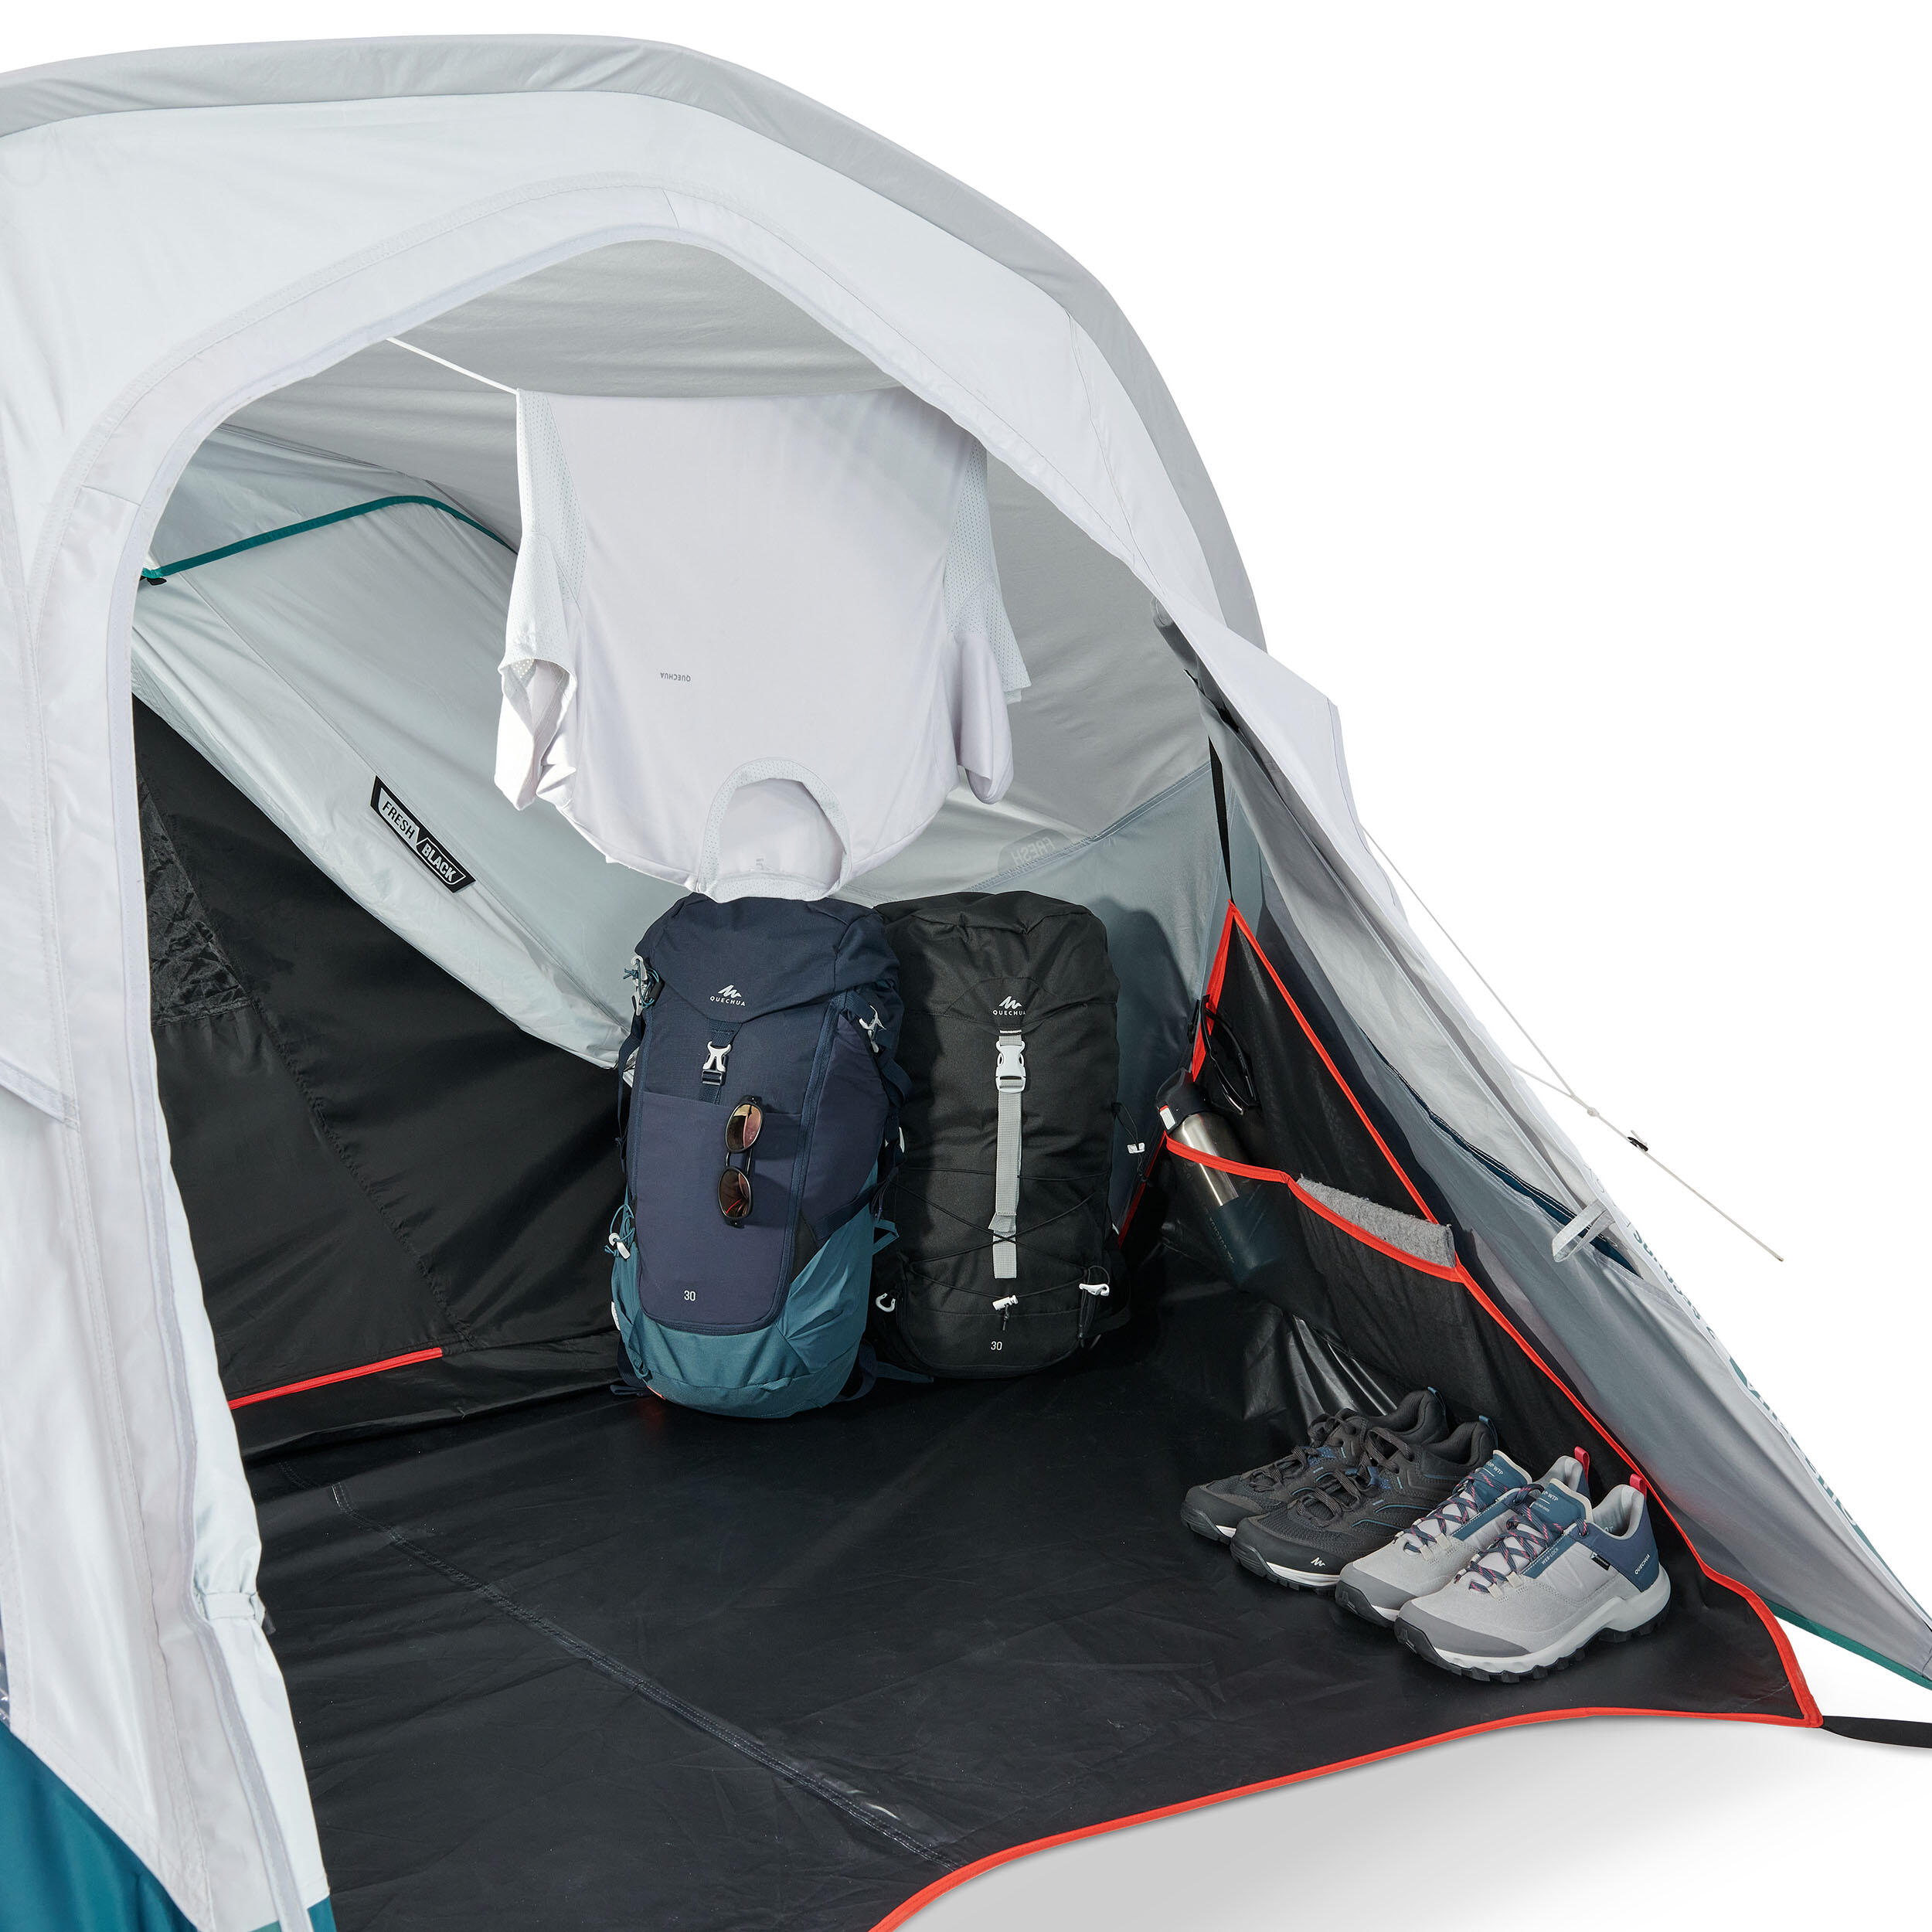 Camping awning - 2 Seconds EASY - Fresh 15/20